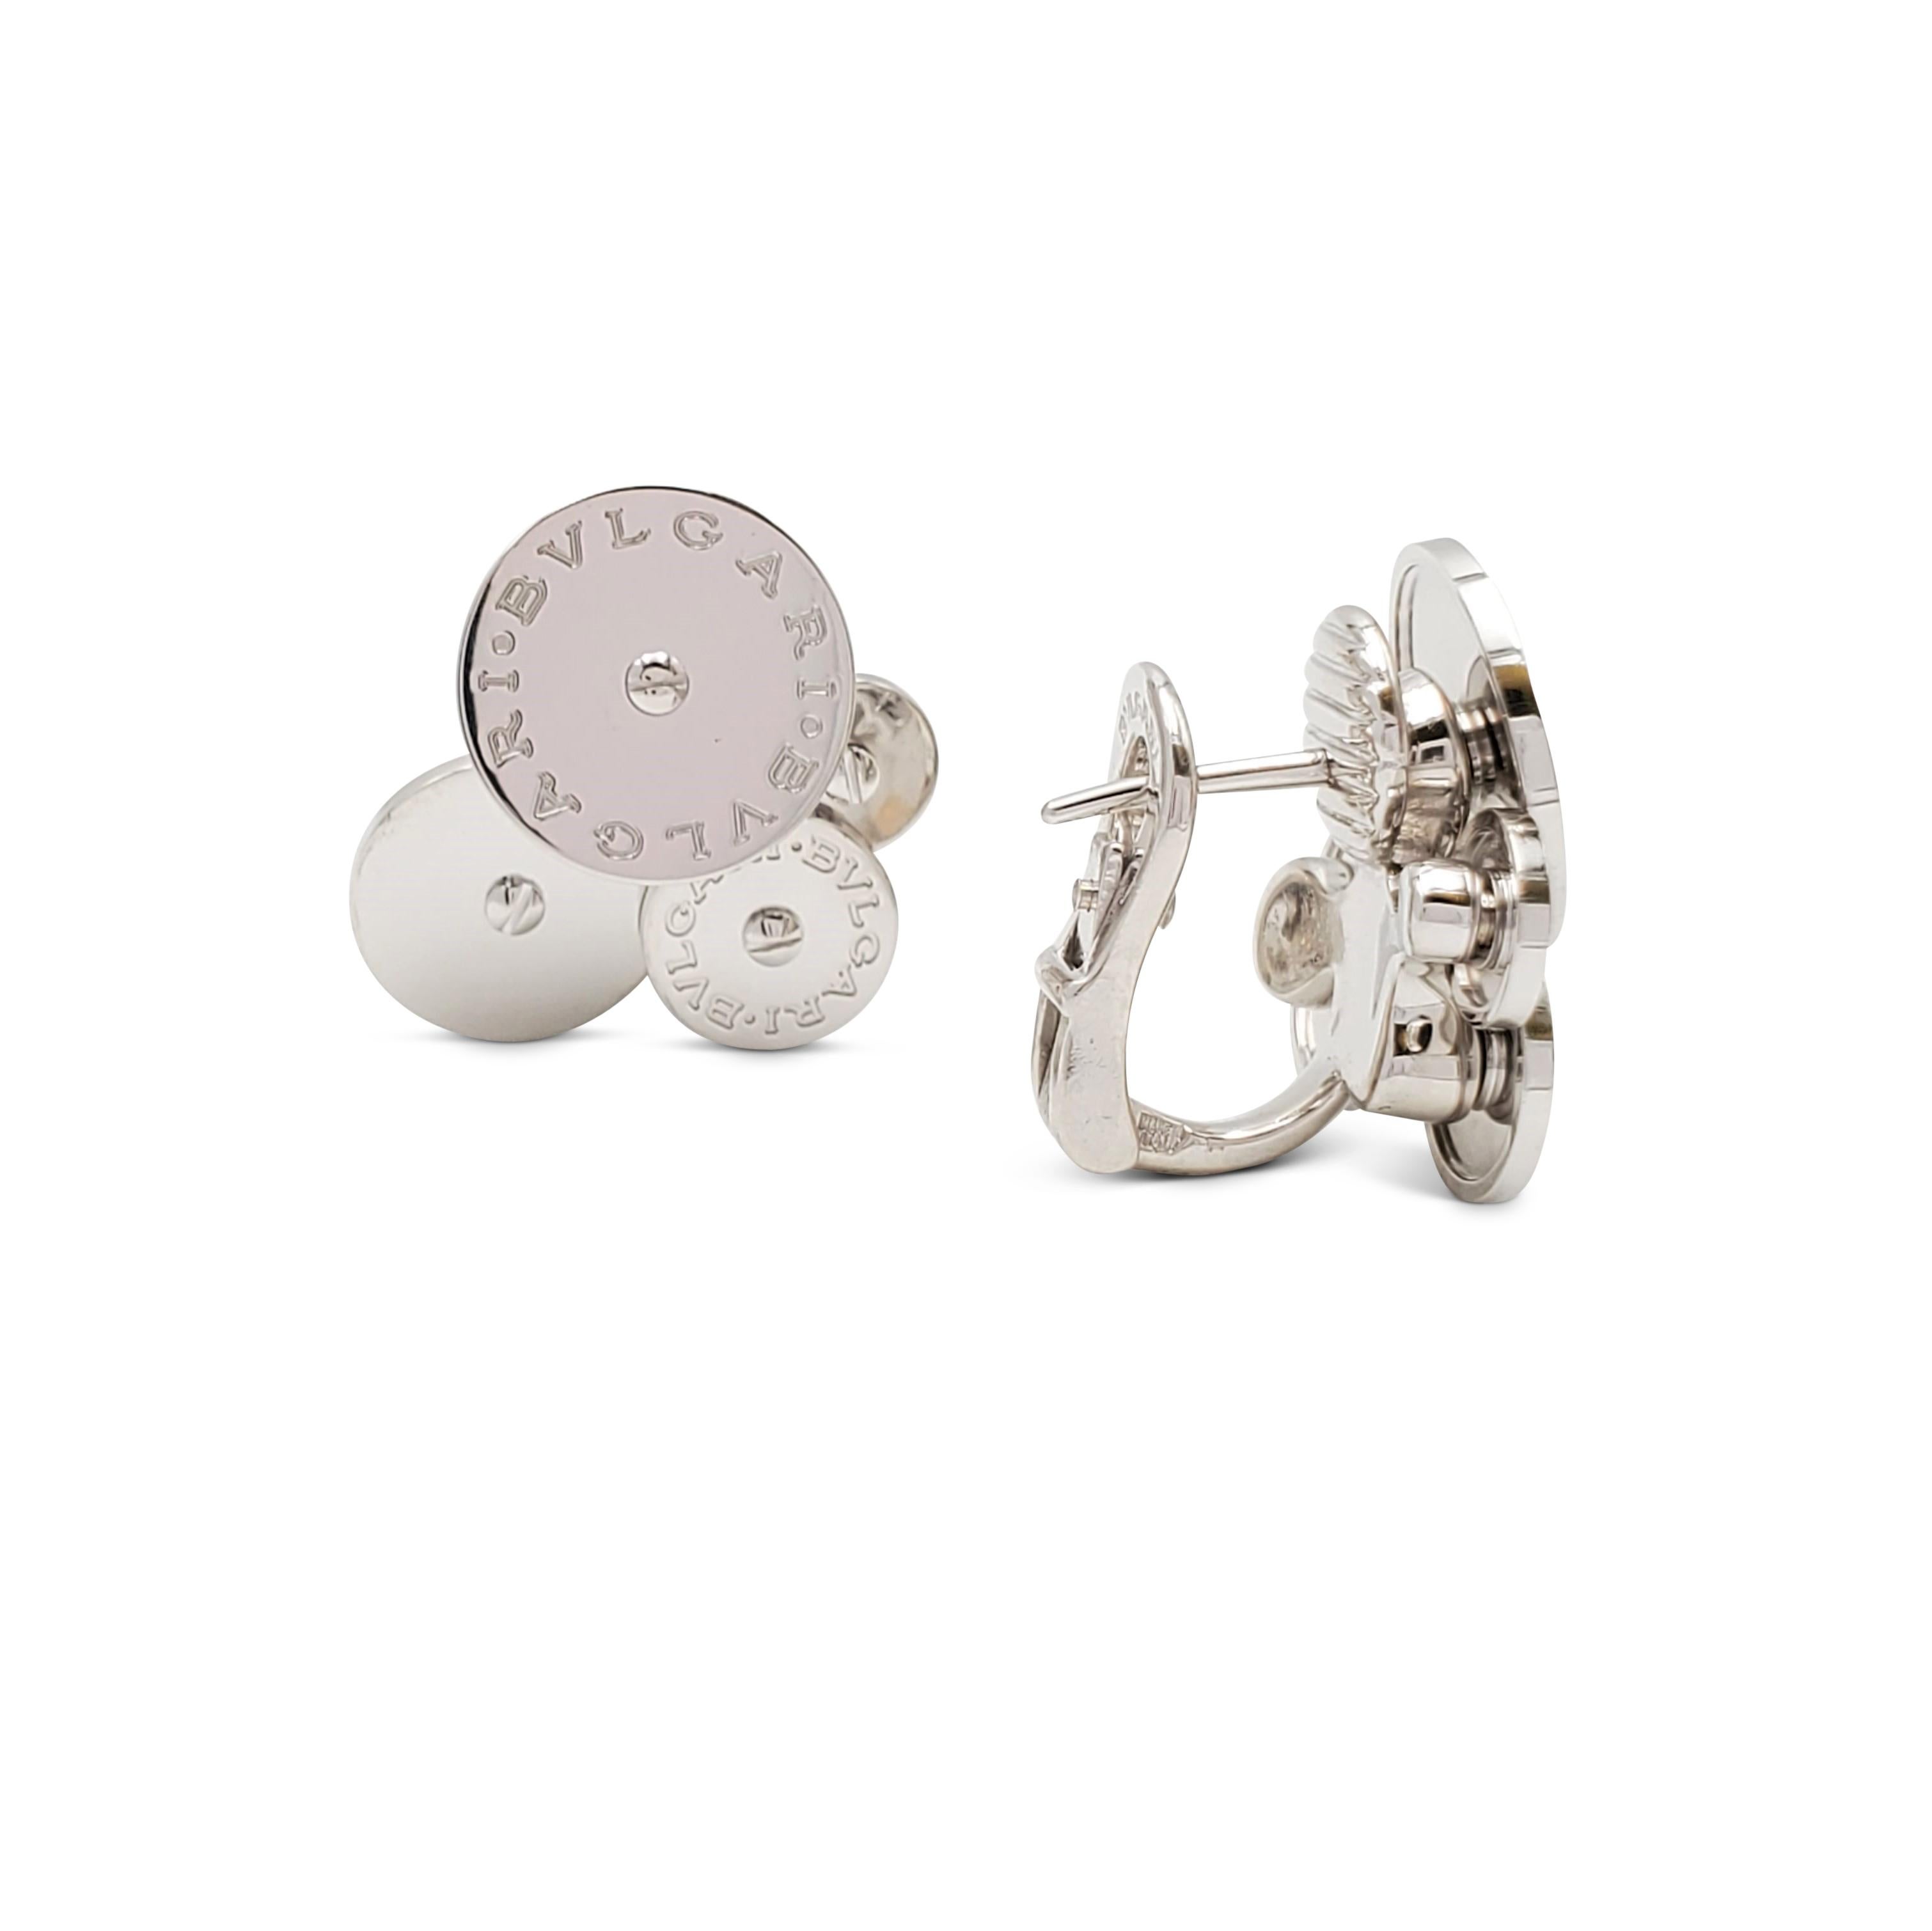 Authentic Bvlgari 'Cicladi' earrings crafted in 18 karat white gold. Each earring is composed of a cluster of 4 spinning circular discs, each graduating in size. The largest disc is engraved with the Bvlgari Bvlgari logo. The earrings measure 2 cm